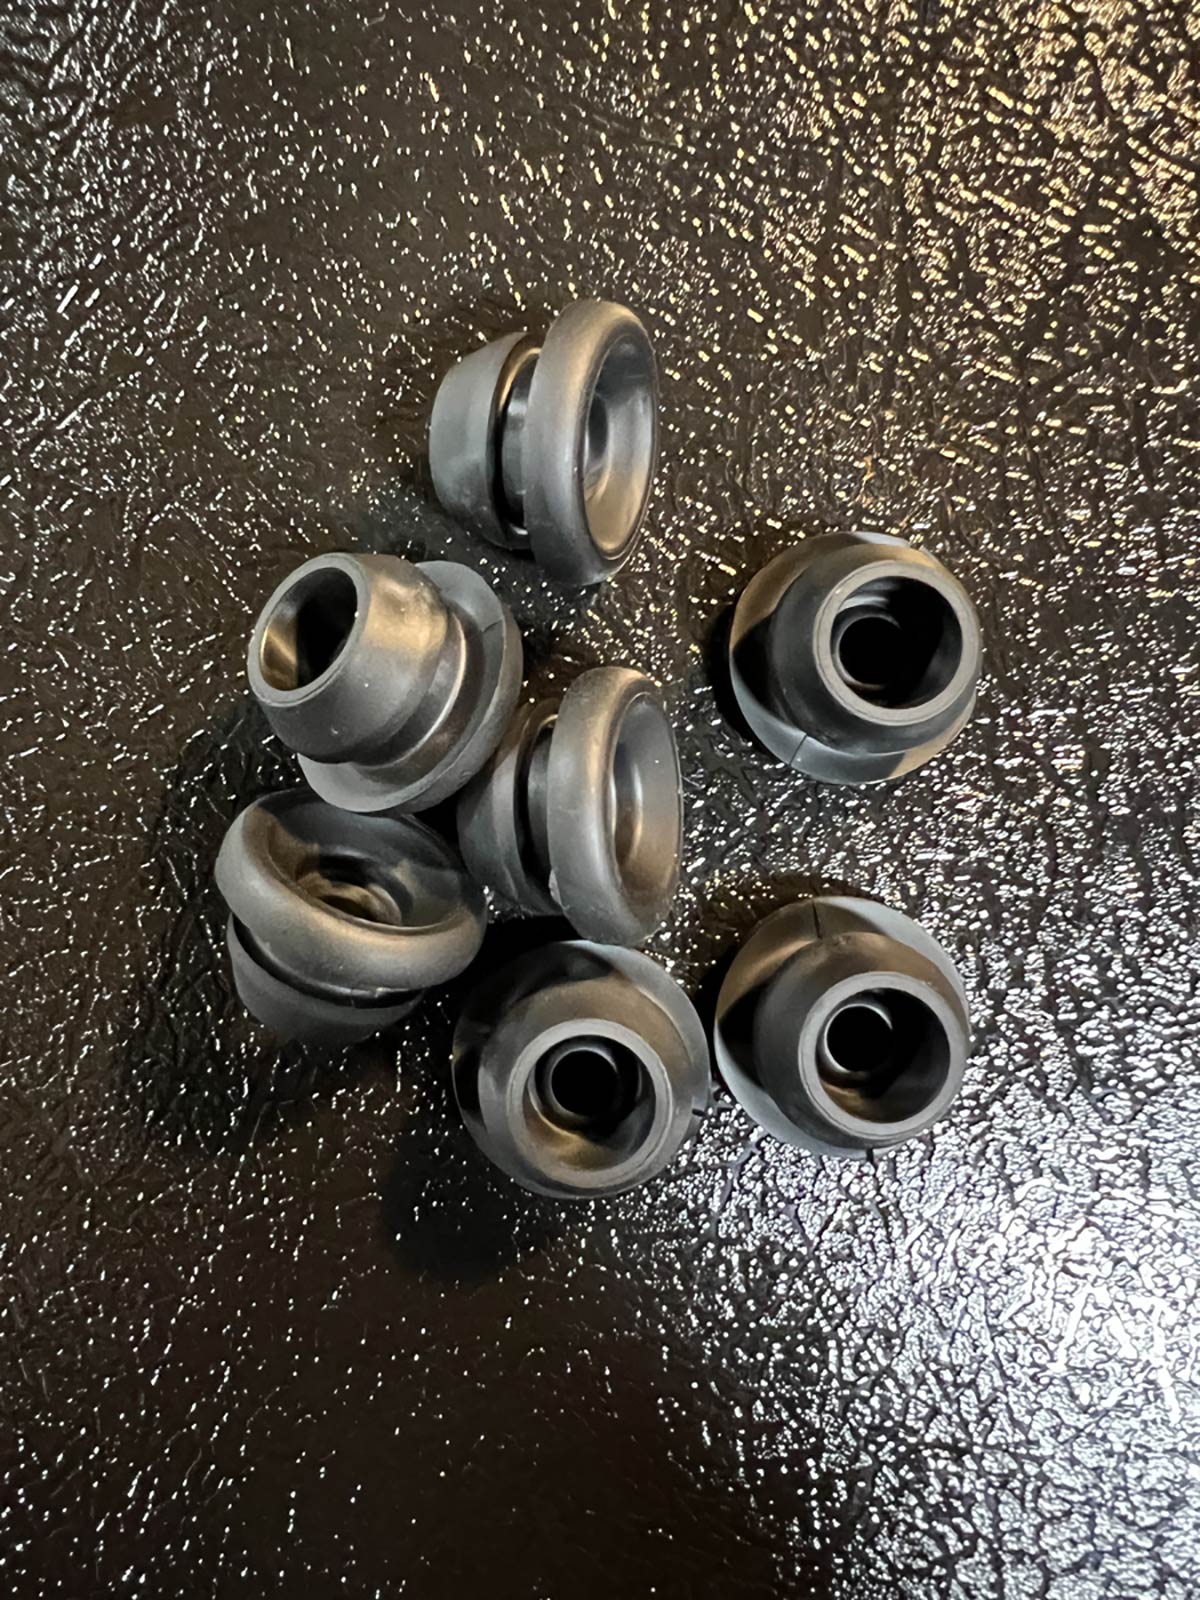 collection of small black rubber automotive grommet parts